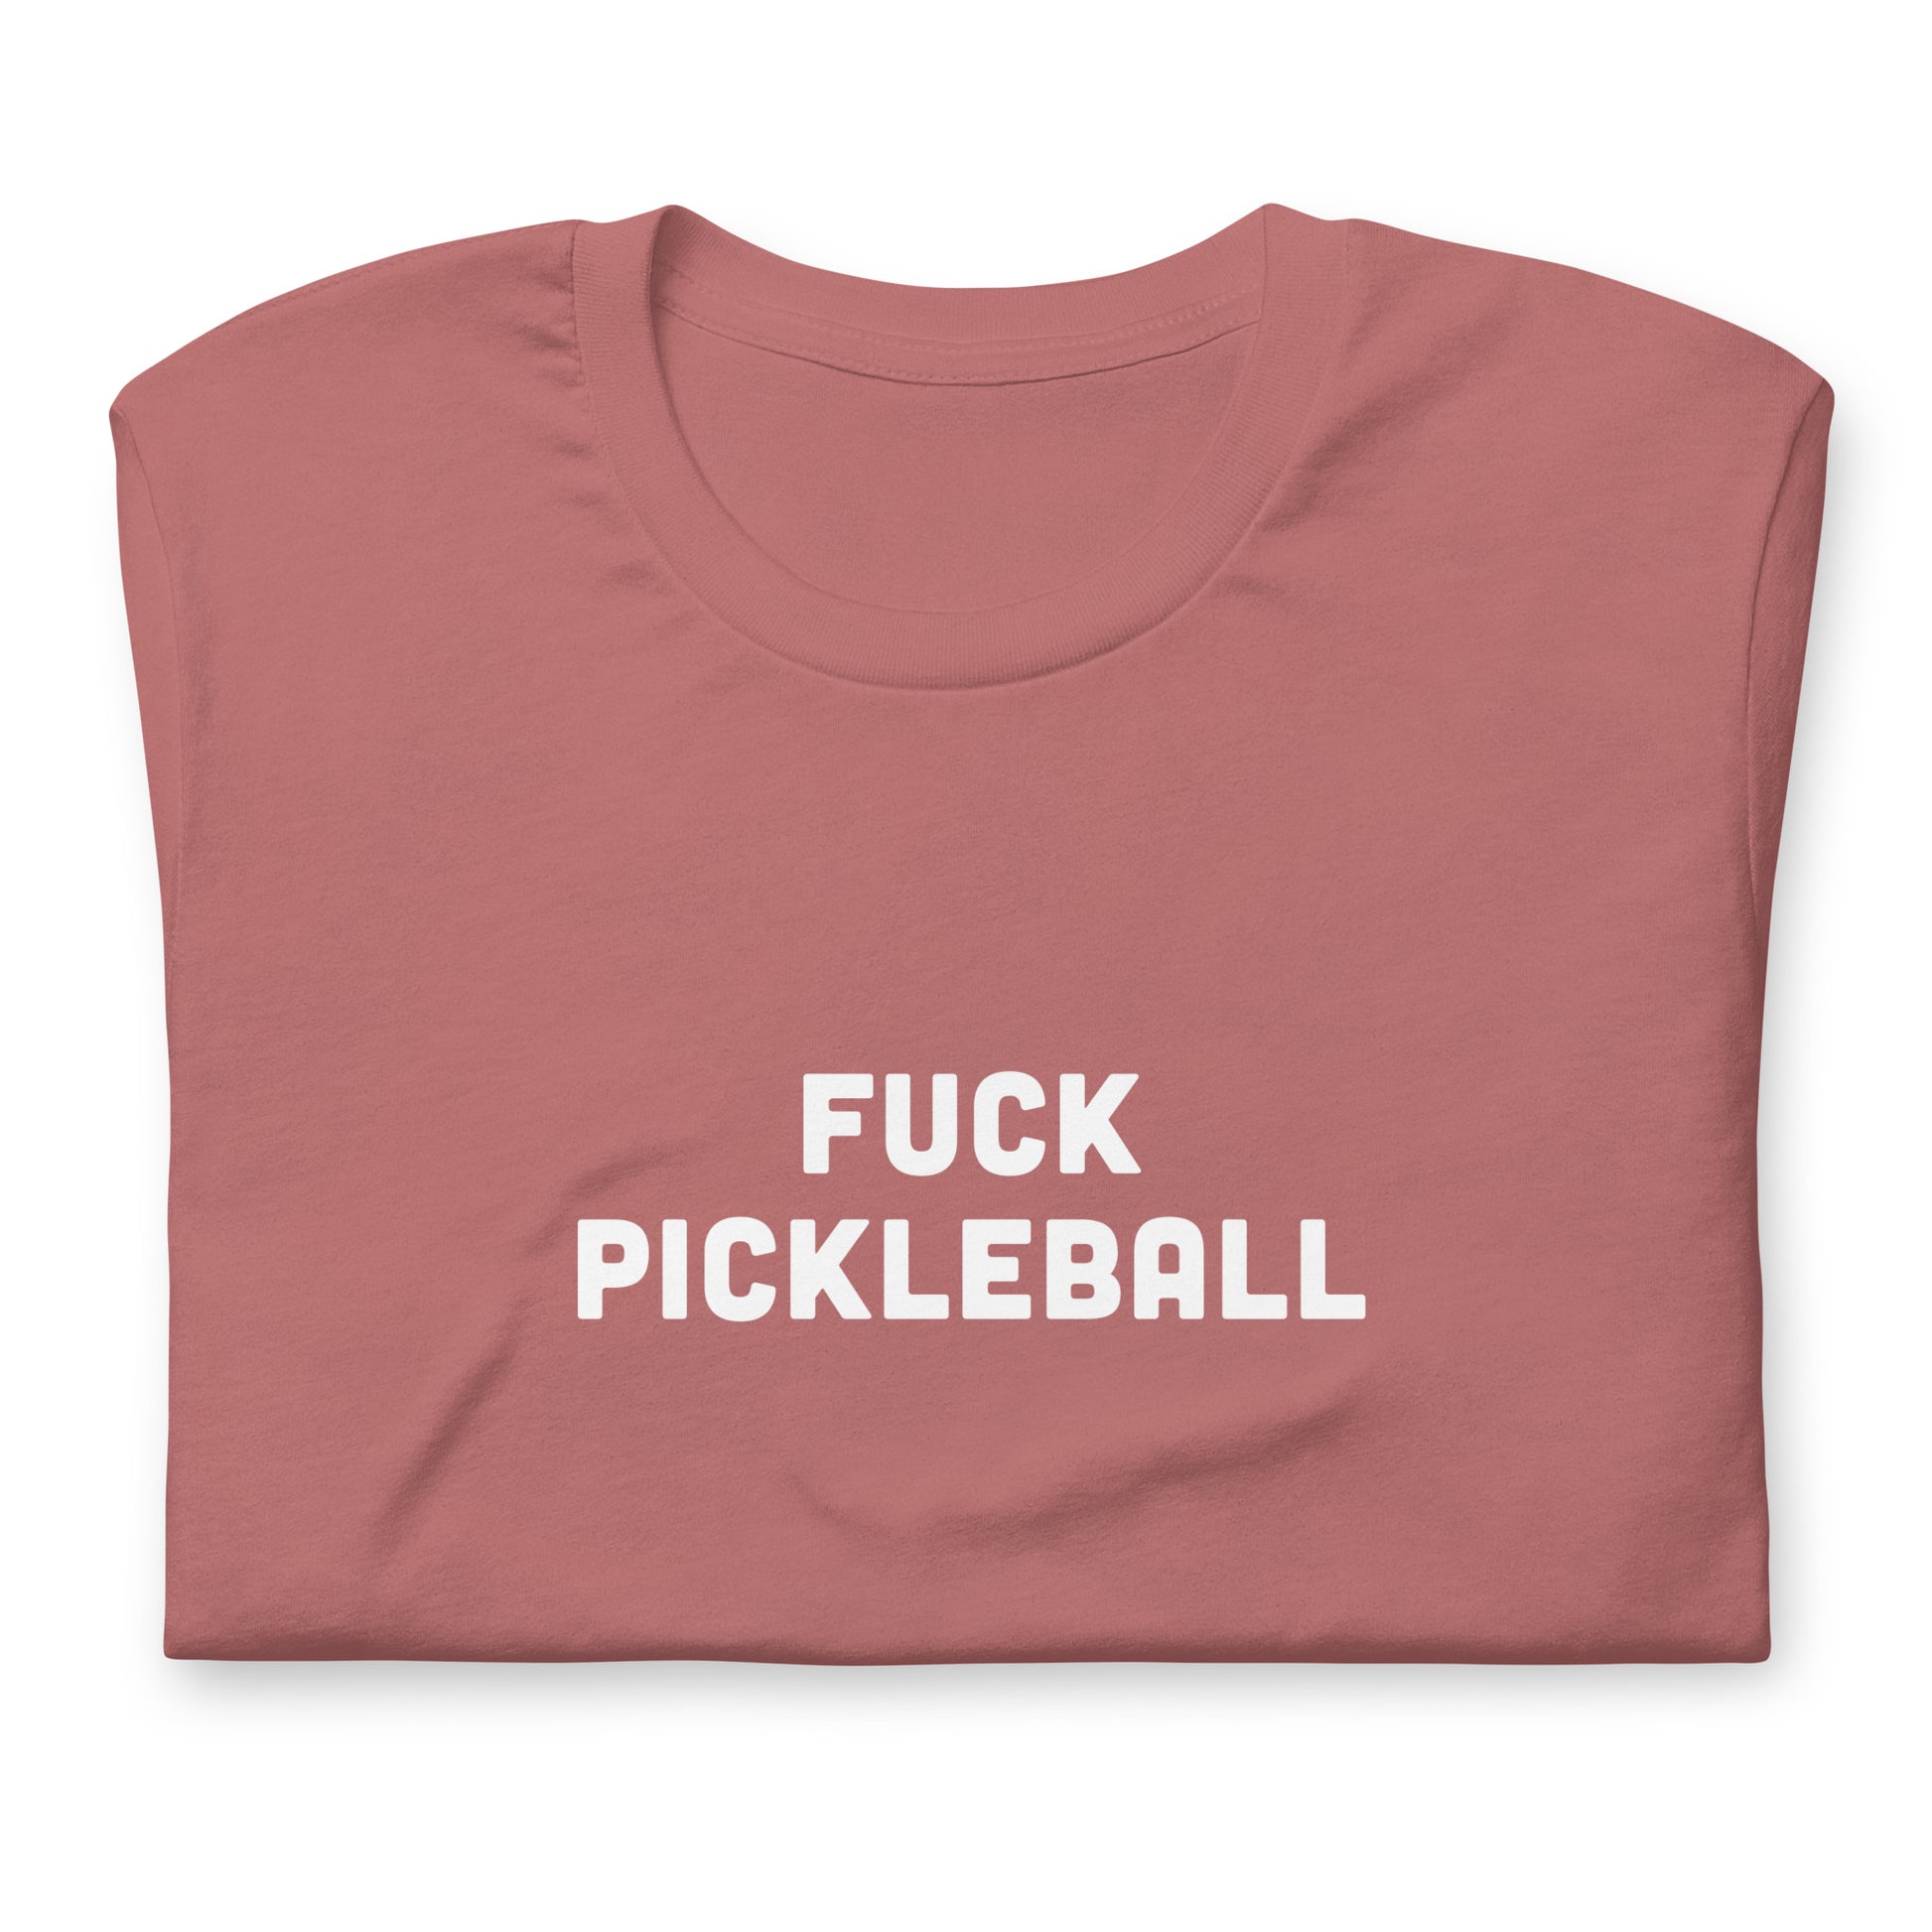 Fuck Pickleball T-Shirt Size XL Color Navy